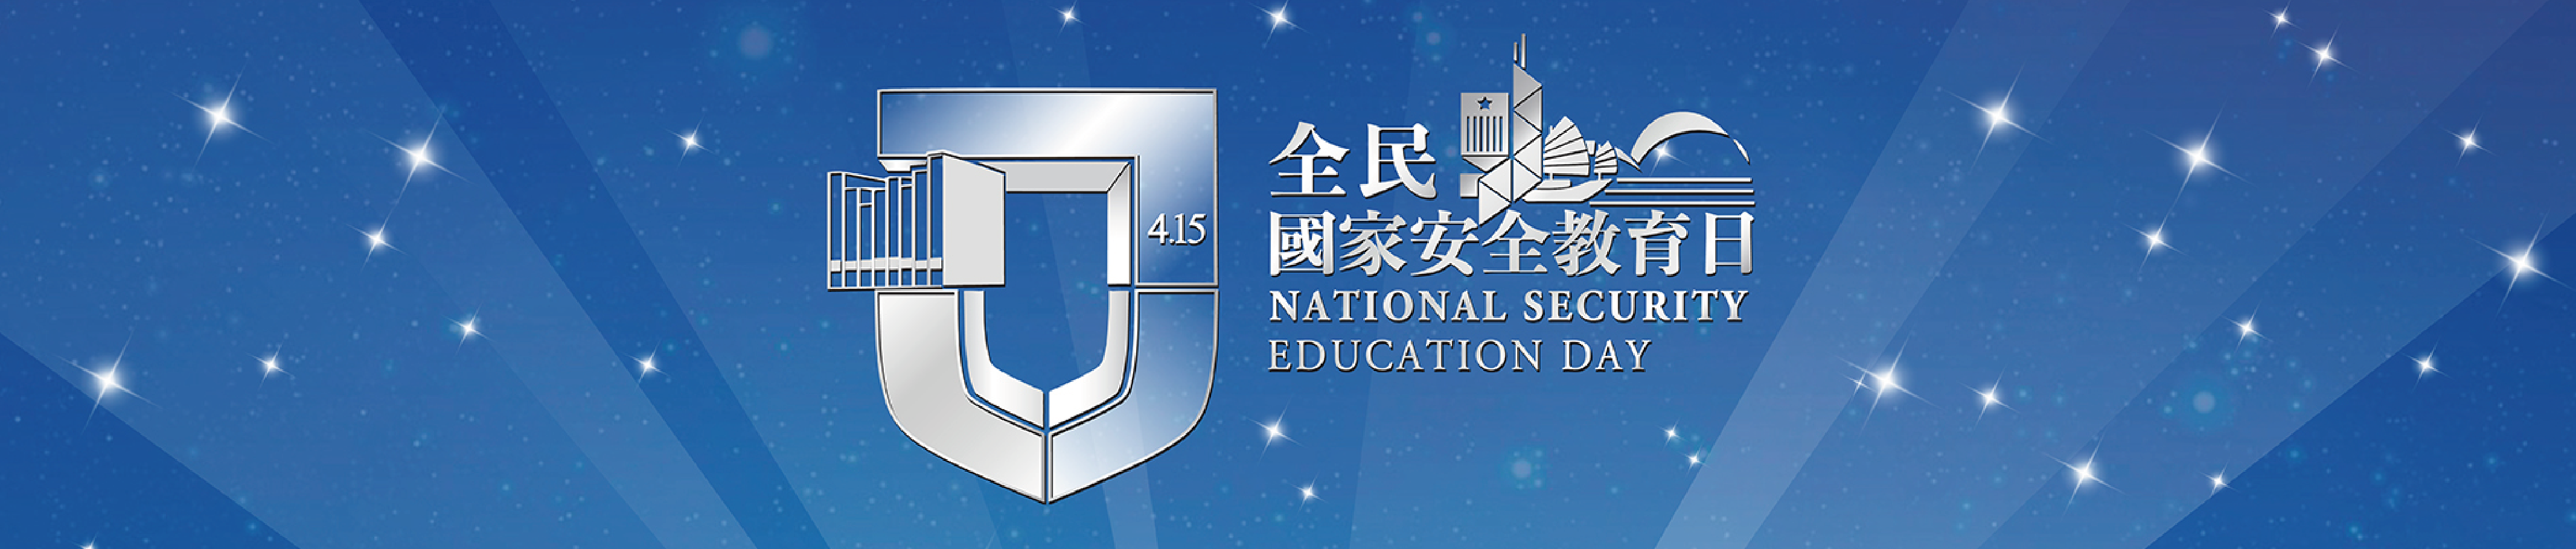 National Security Education Day 